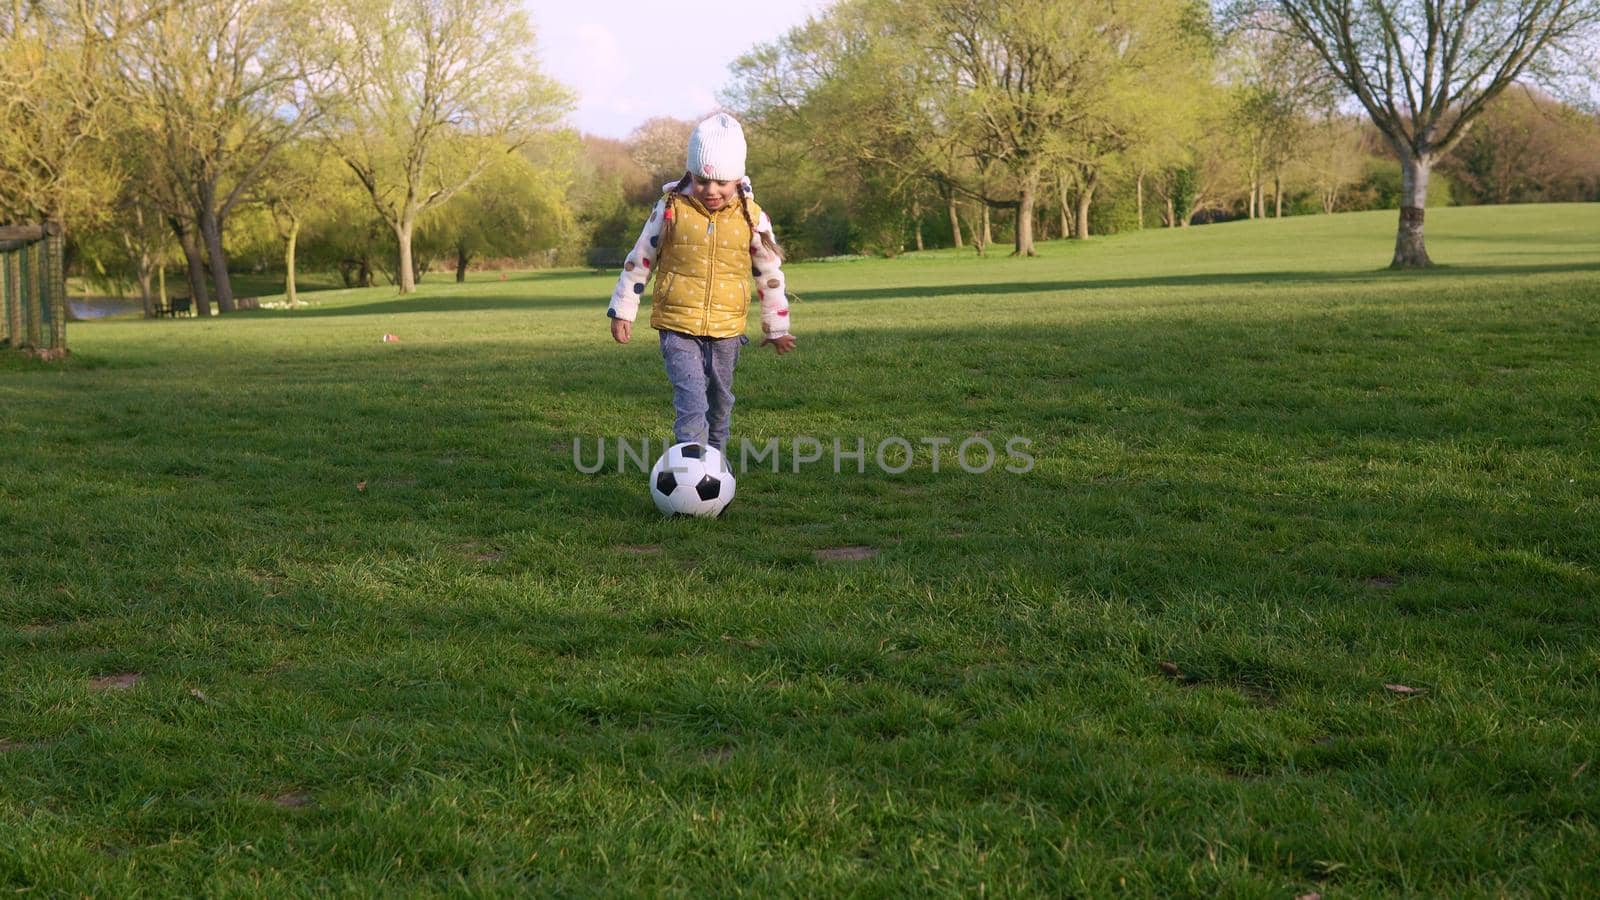 Happy Family Of Children Having Fun In Spring Park. Little Kid Run. Child Girl Dribbles Black White Classic Soccer Ball On Green Grass. People Playing Football. Childhood, Sport, Championship Concept.